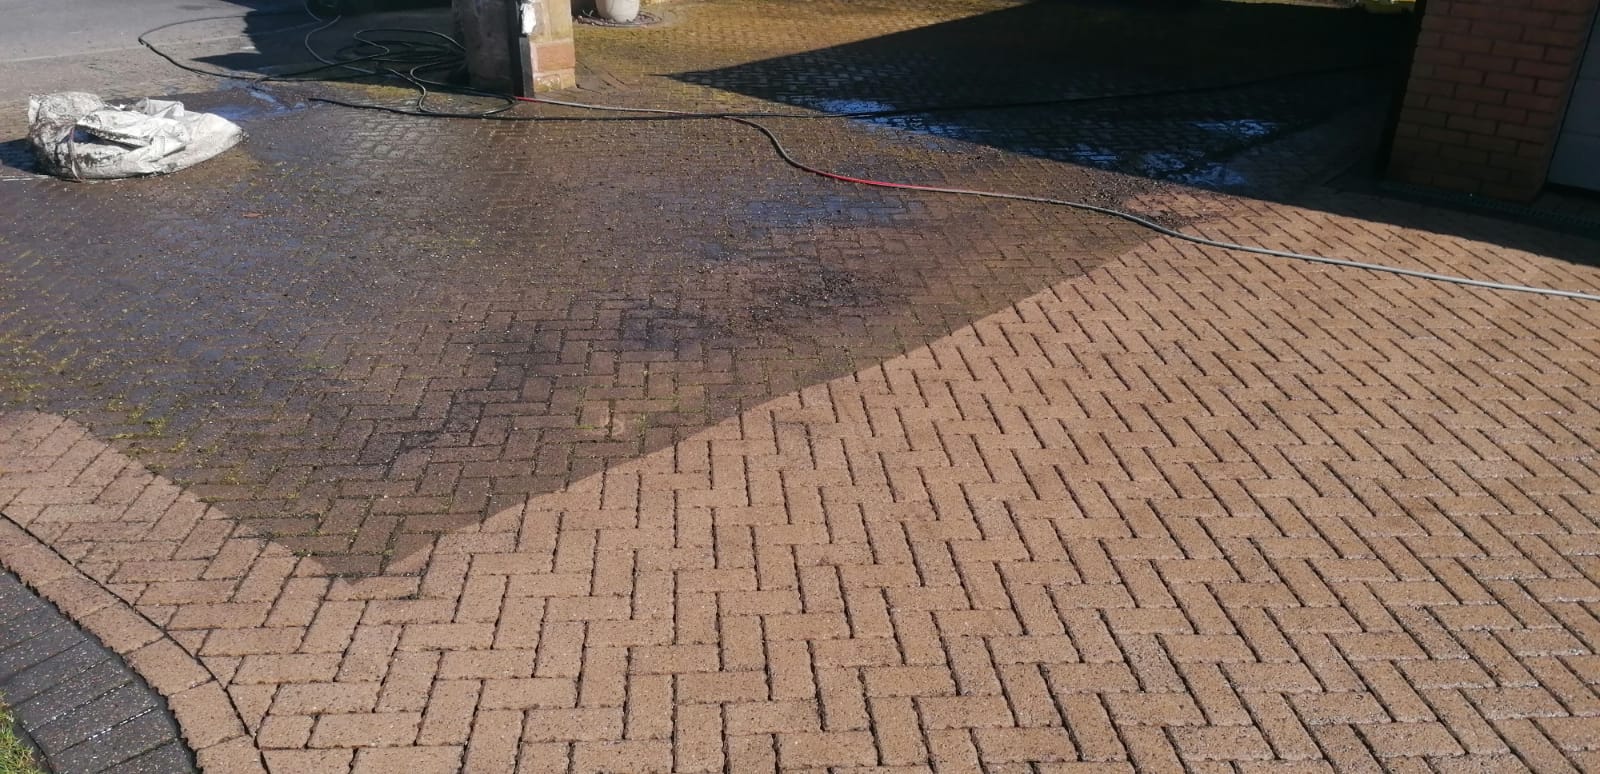 How often should you pressure wash your driveway and/or patio